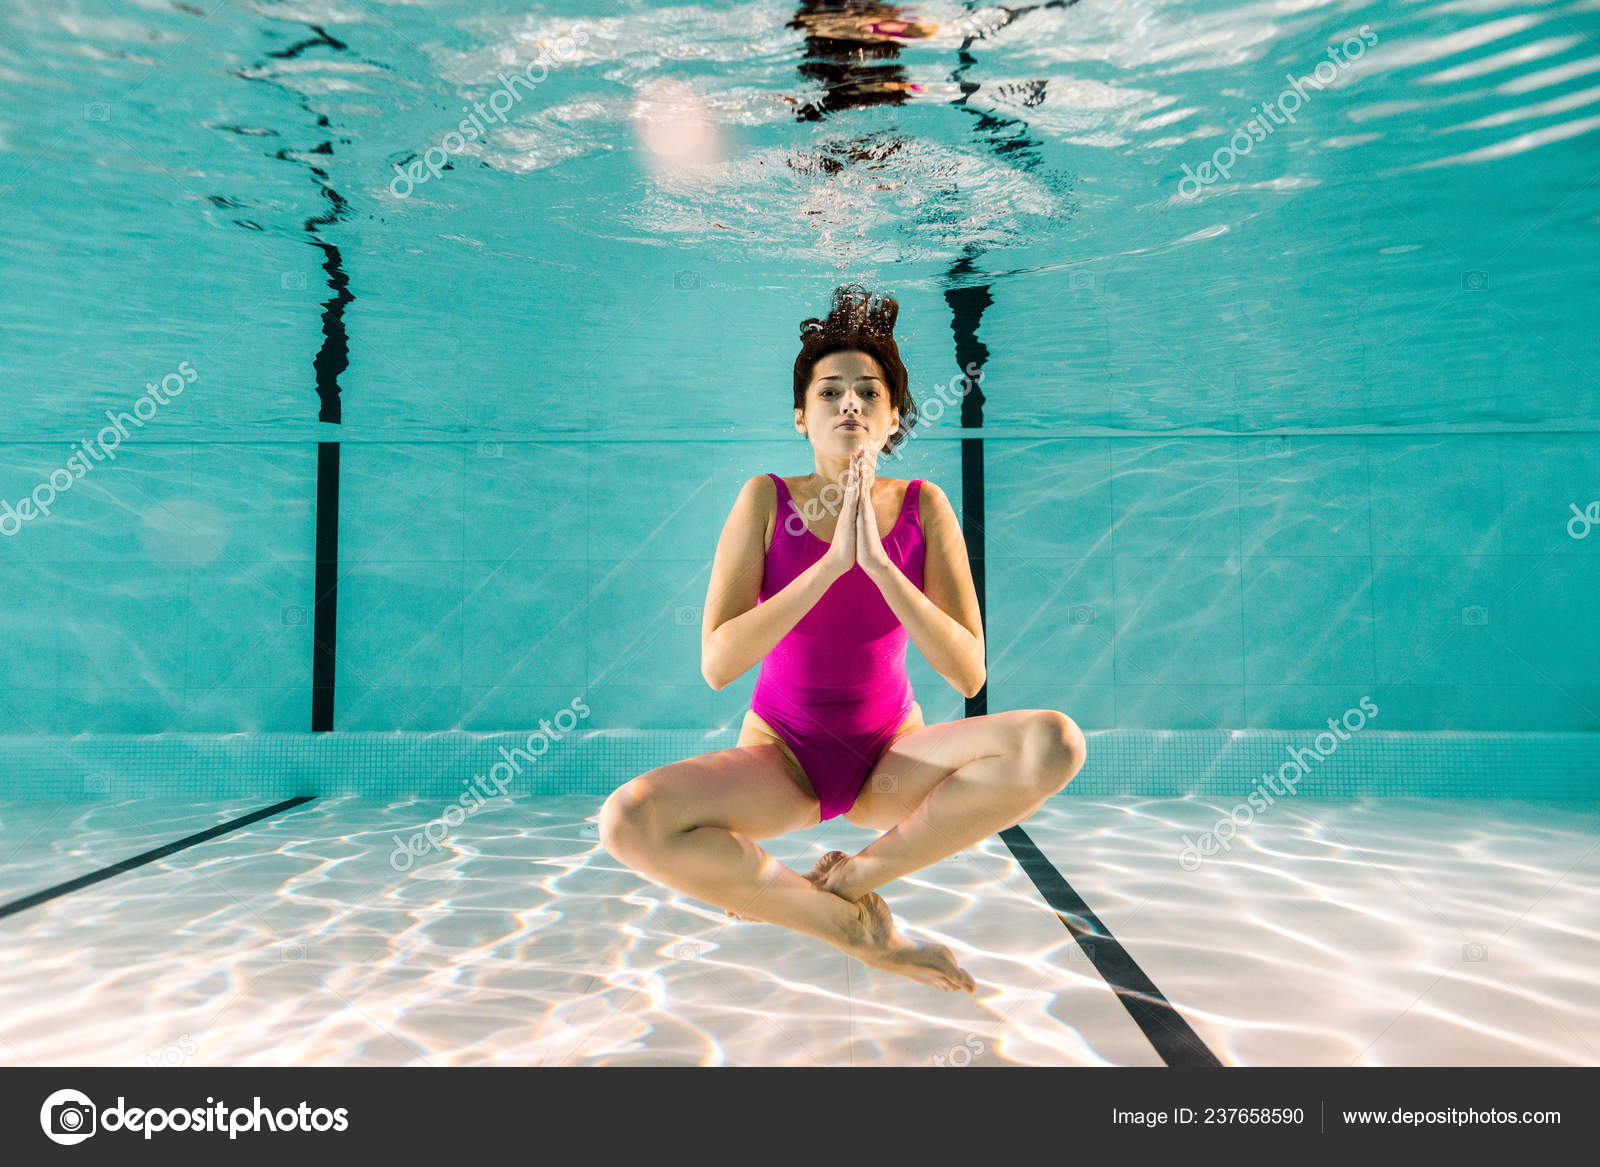 Premium Photo | Two young women doing yoga pose at the swimming pool